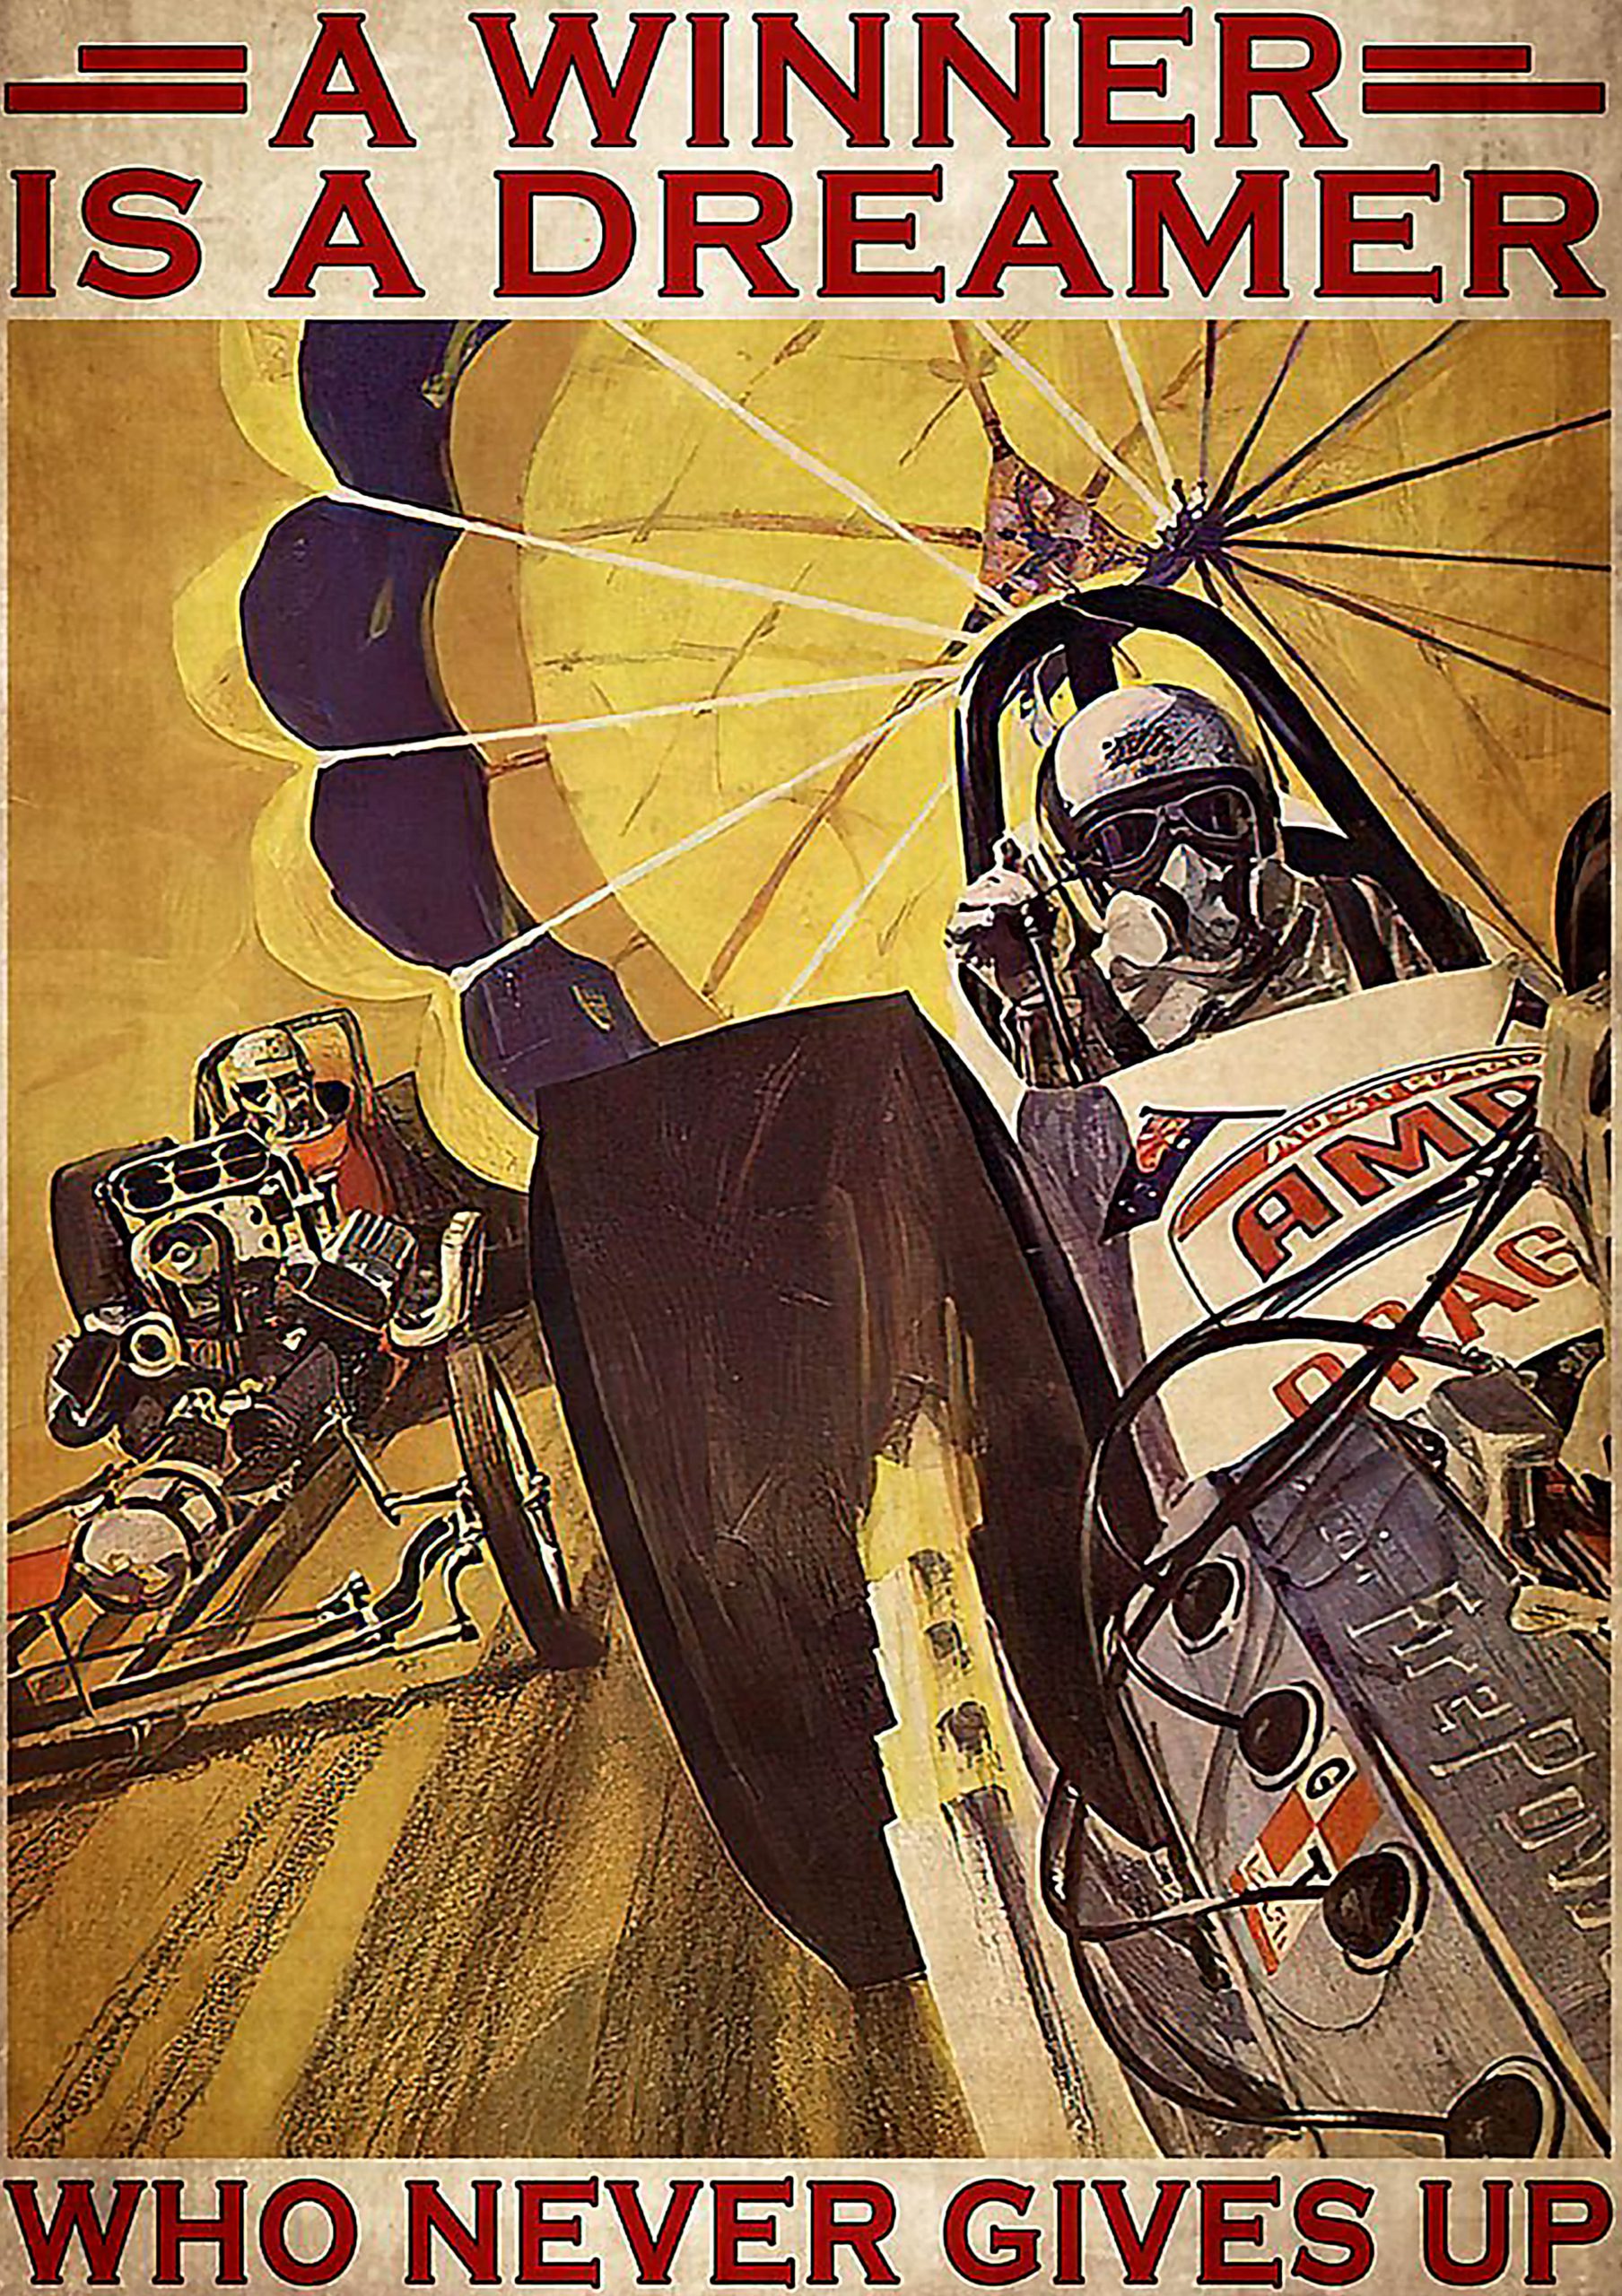 vintage drag racer a winner is a dreamer who never gives up poster 1 - Copy (2)